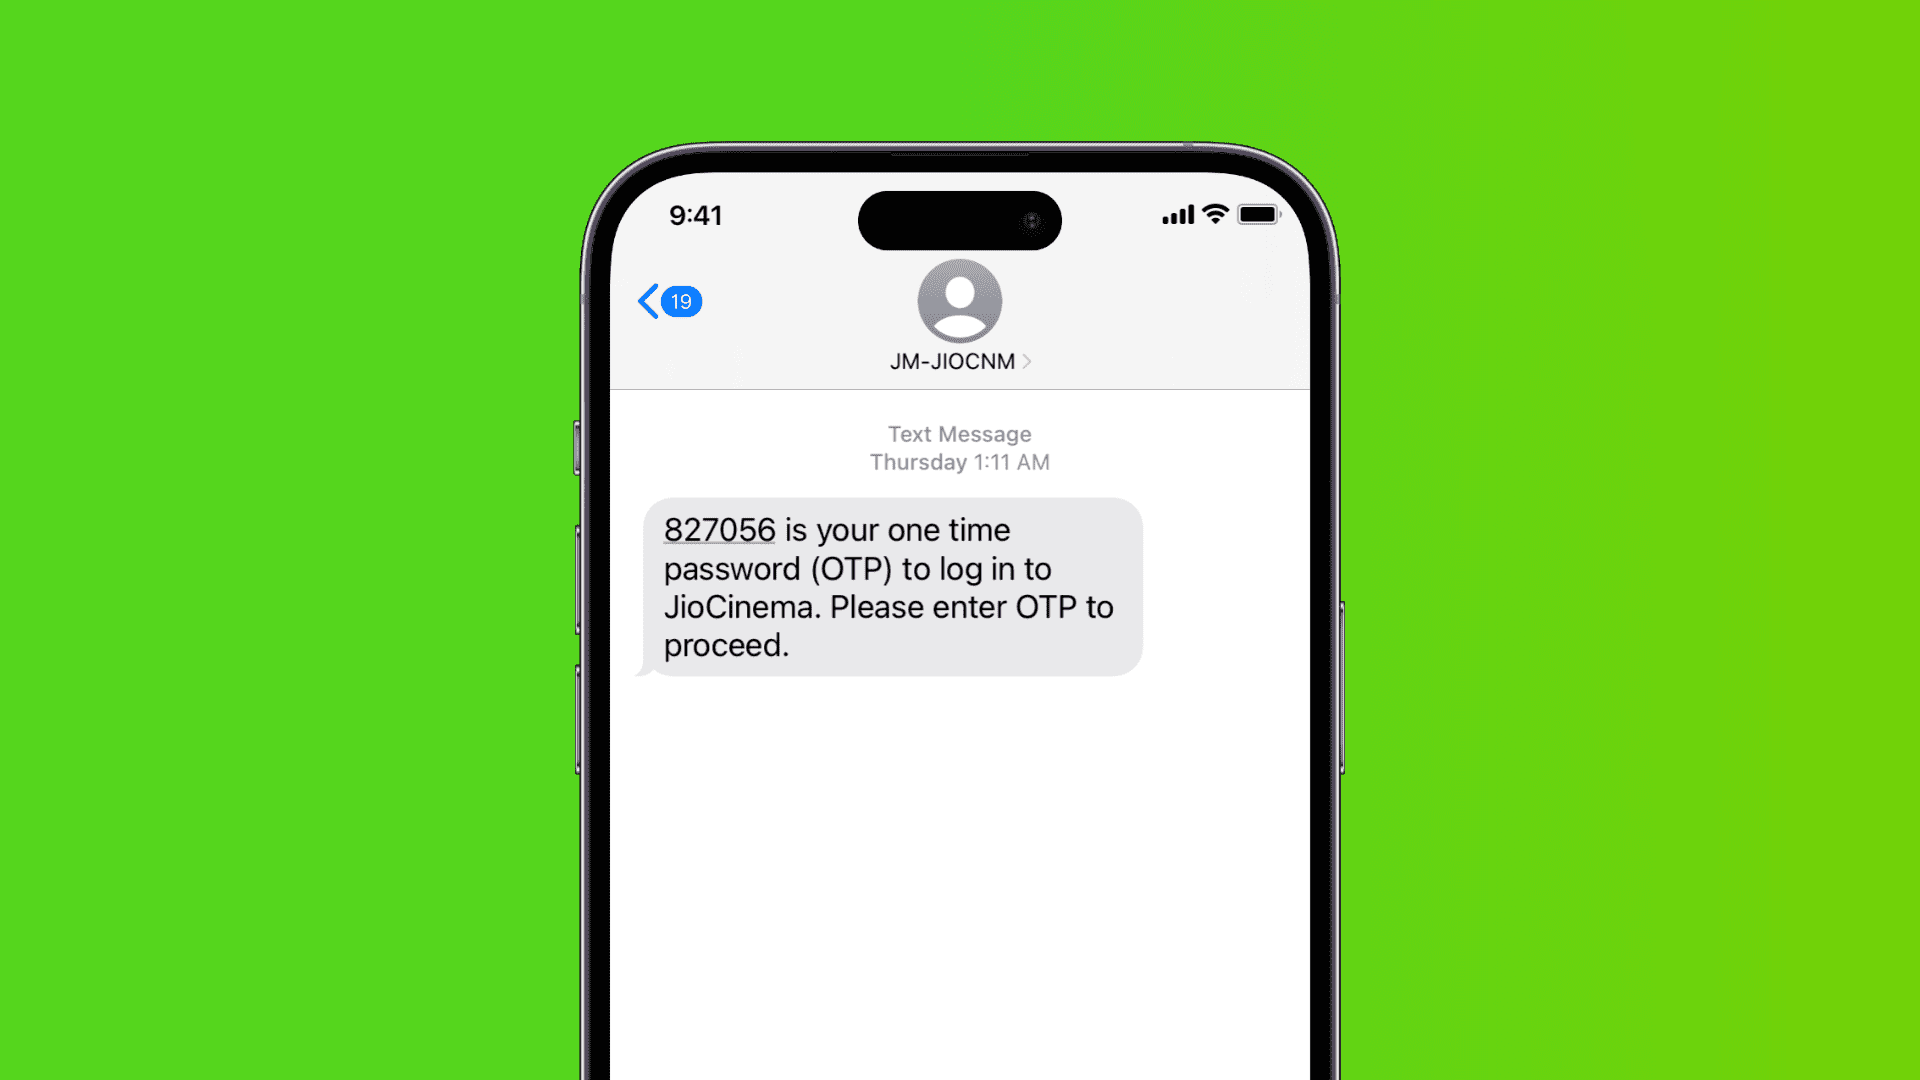 Text message with OTP on iPhone